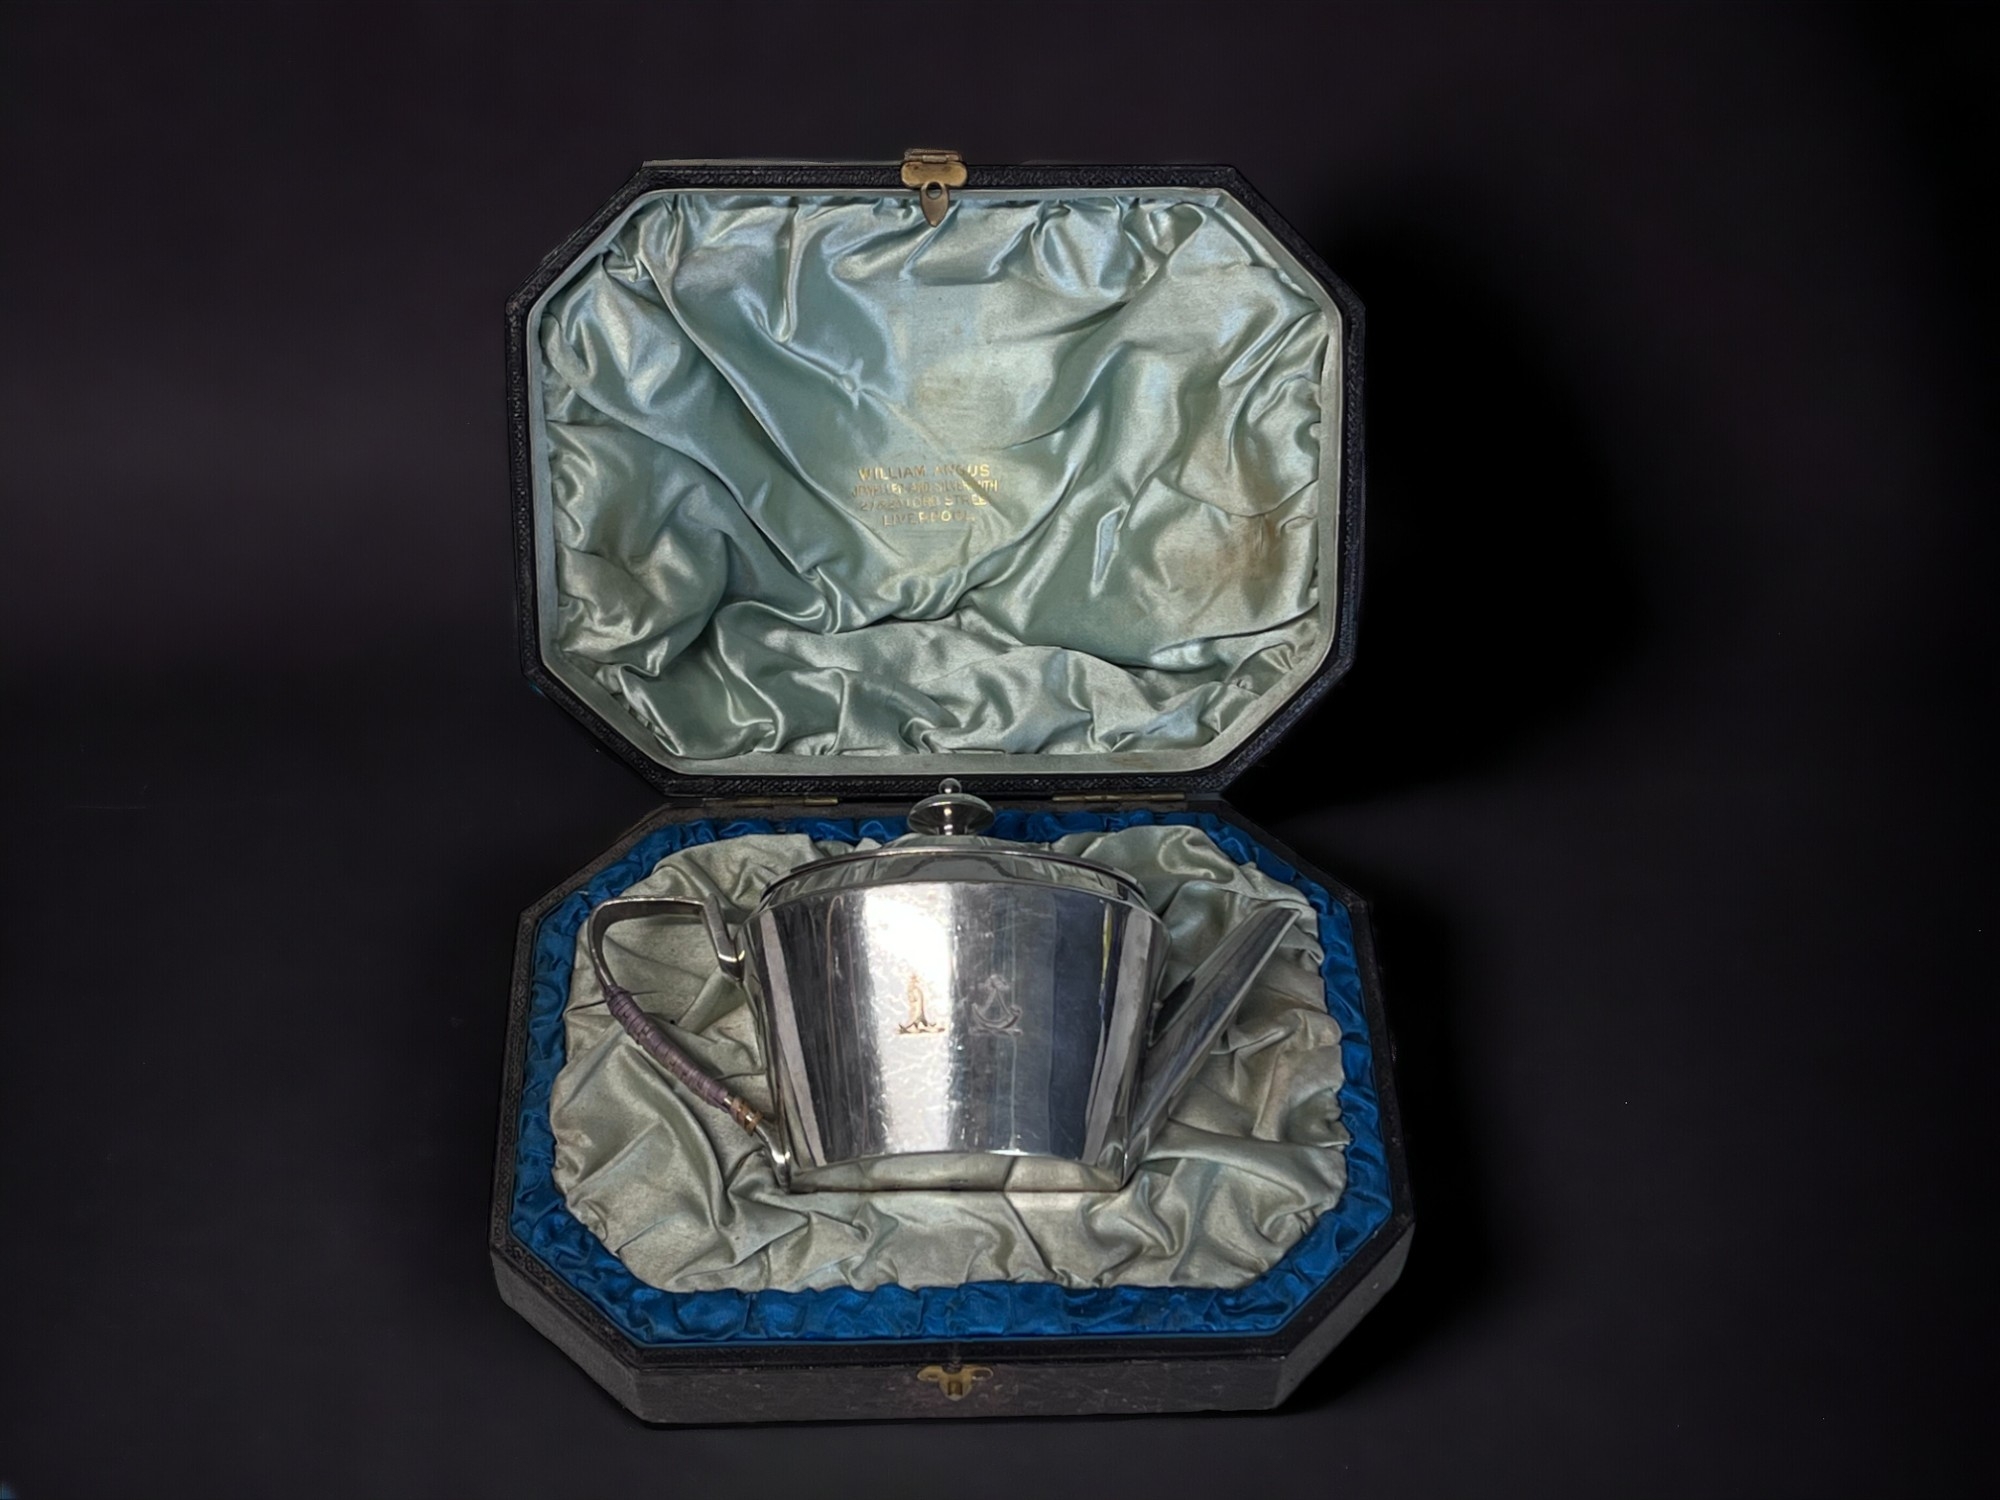 A VICTORIAN BOXED SILVER PLATE TRAVEL / PICNIC TEA SET. By Richard Hodd & Son. The design is very